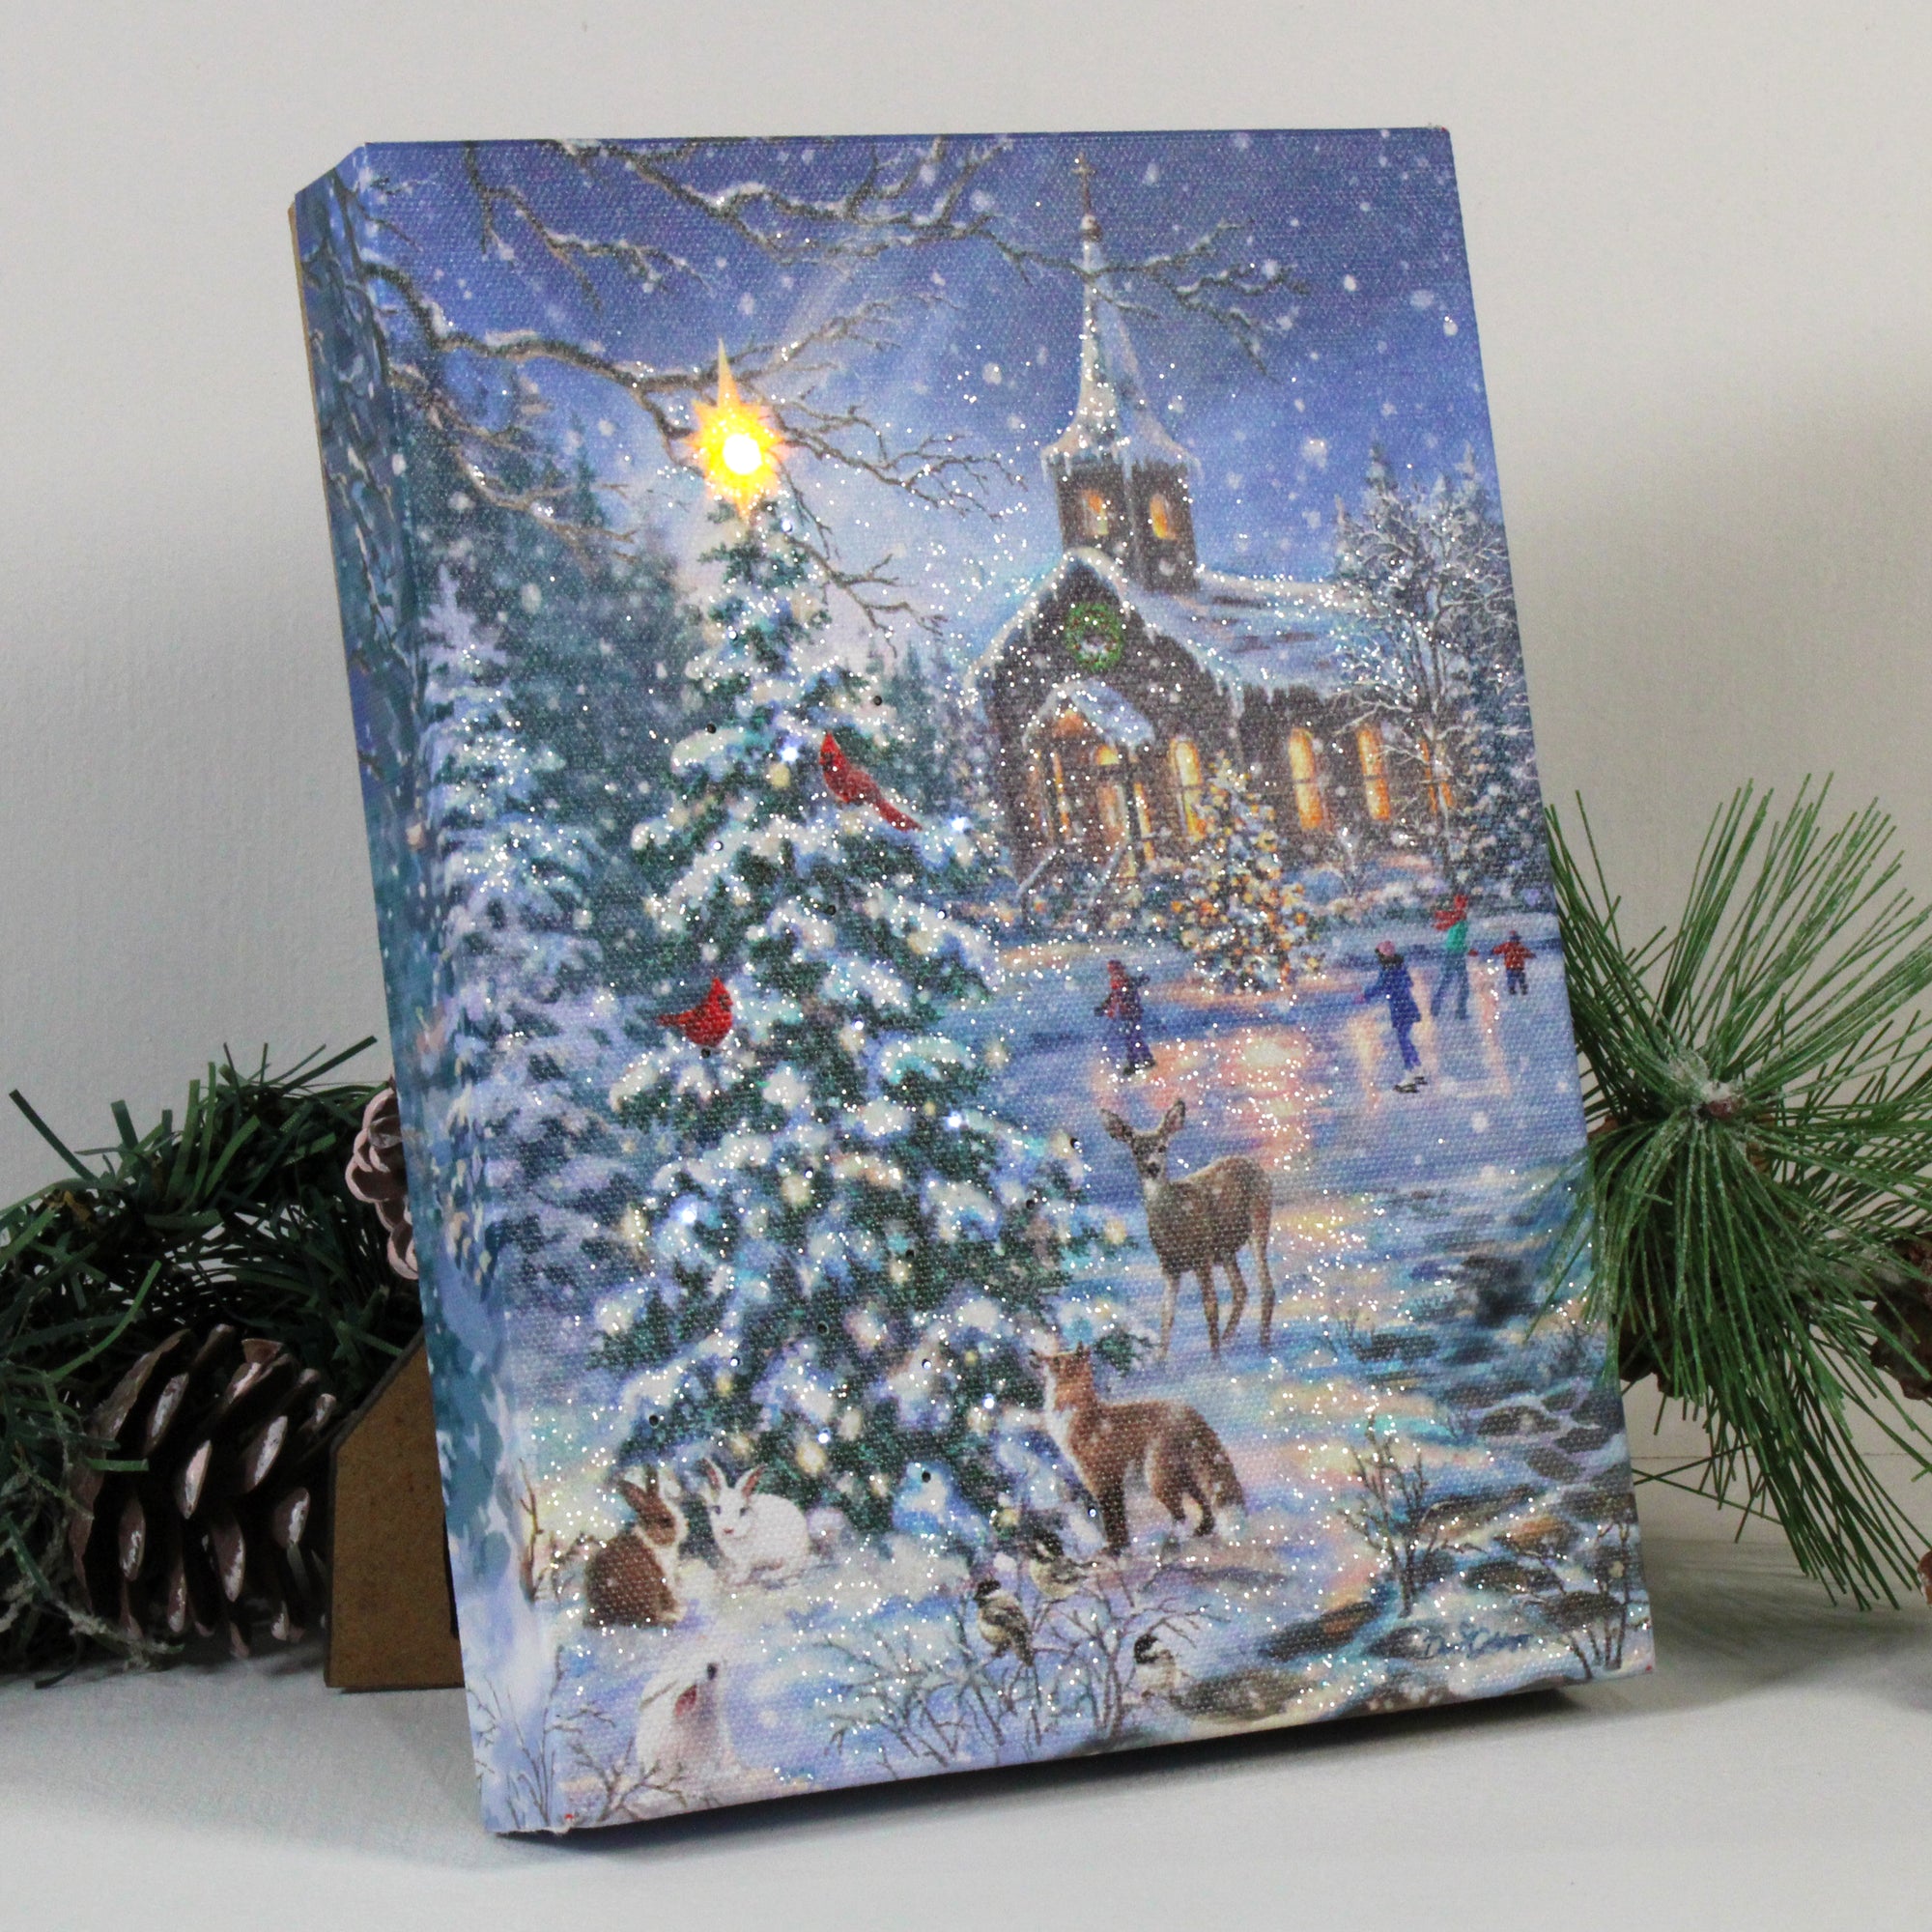 Rejoice 8x6 Lighted Tabletop Canvas